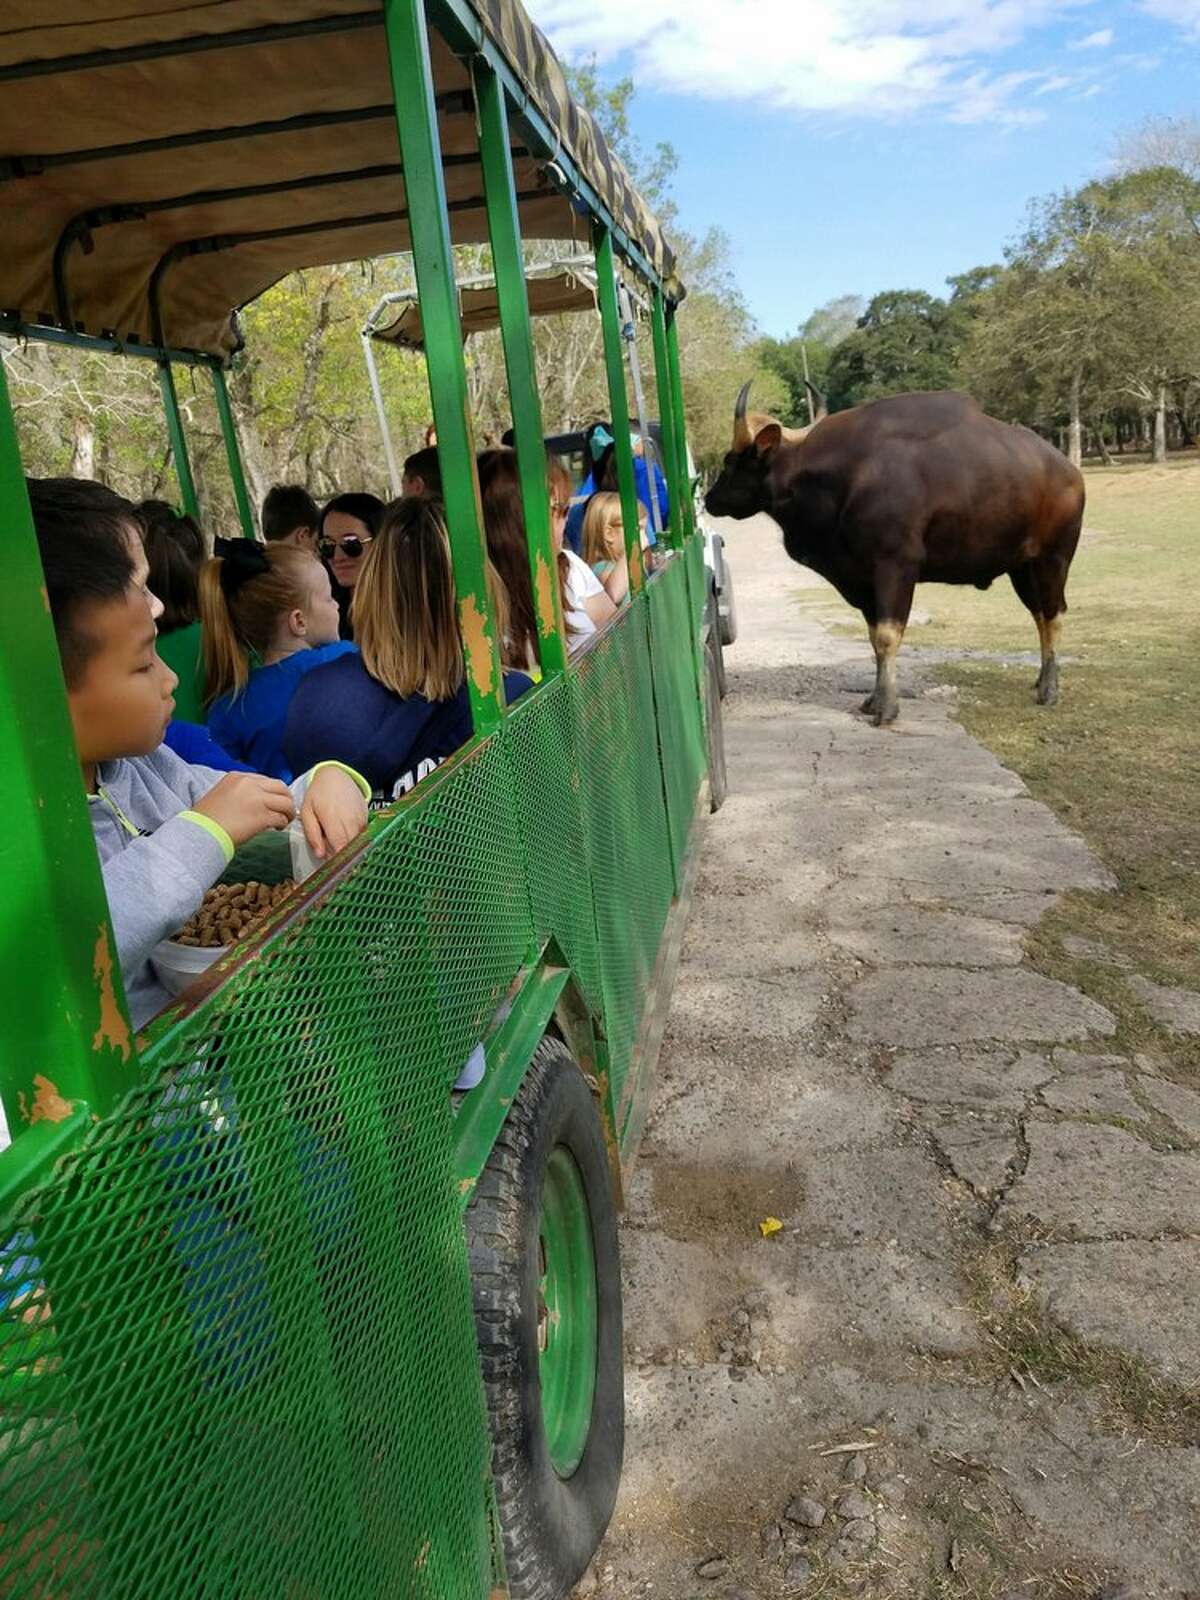 Bayou Wildlife Zoo5050 FM 517, Alvin This kid-friendly zoo tucked away in Alvin lets the animals roam freely throughout the property and offers attendees the chance to get up and close and personal with them. Photo courtesy Jo J/Yelp